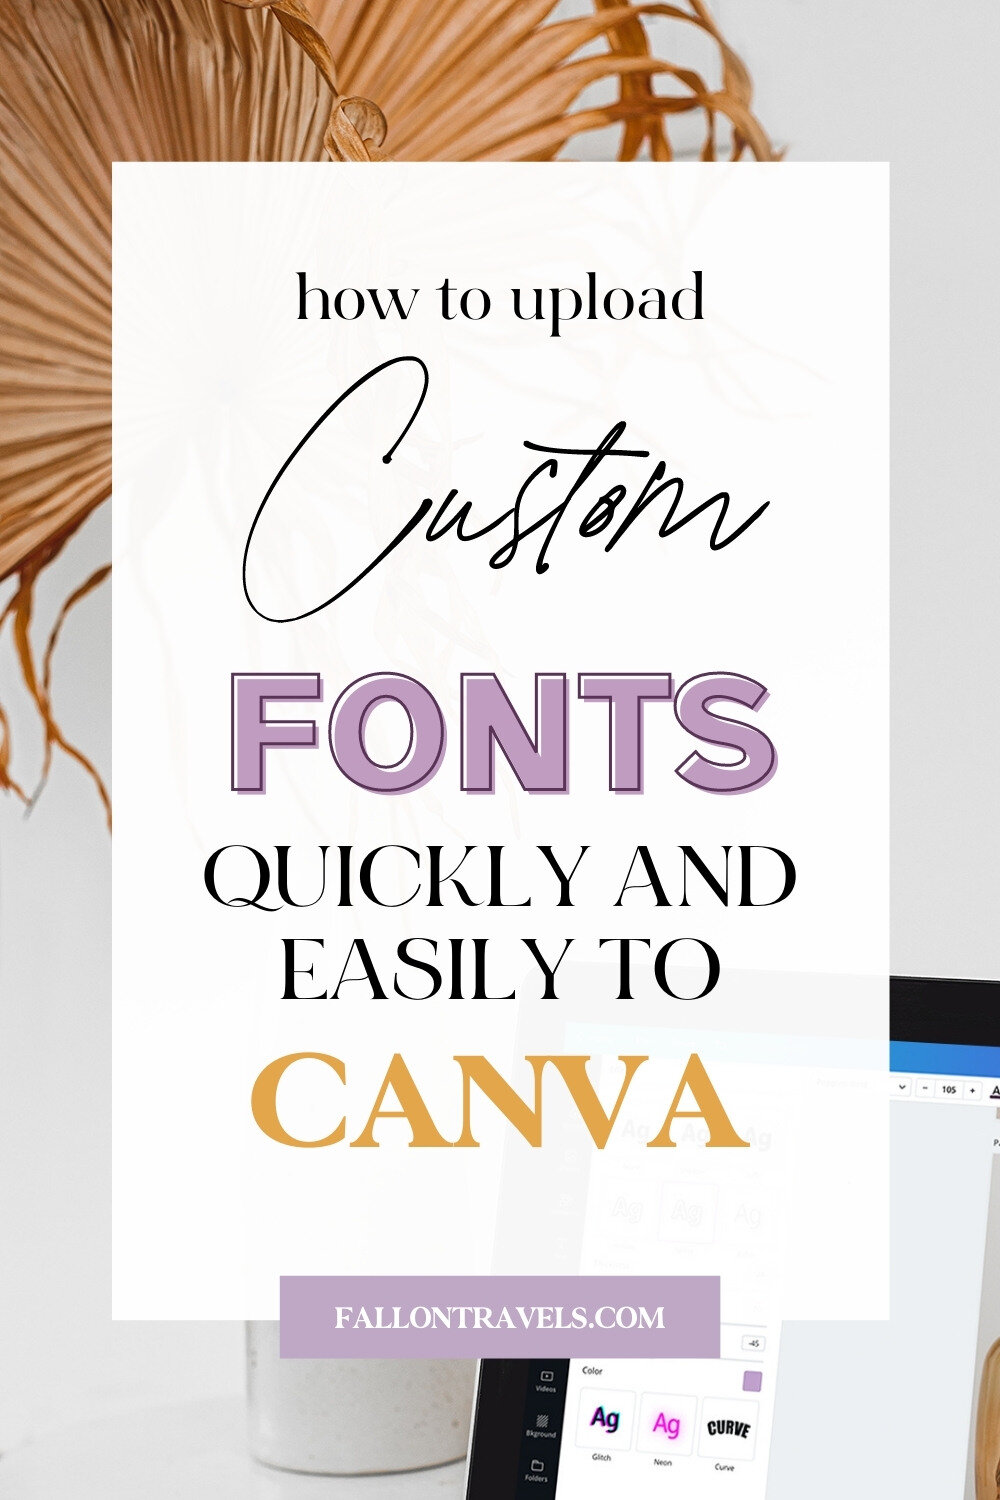 How to upload fonts to Canva | Fallon Travels